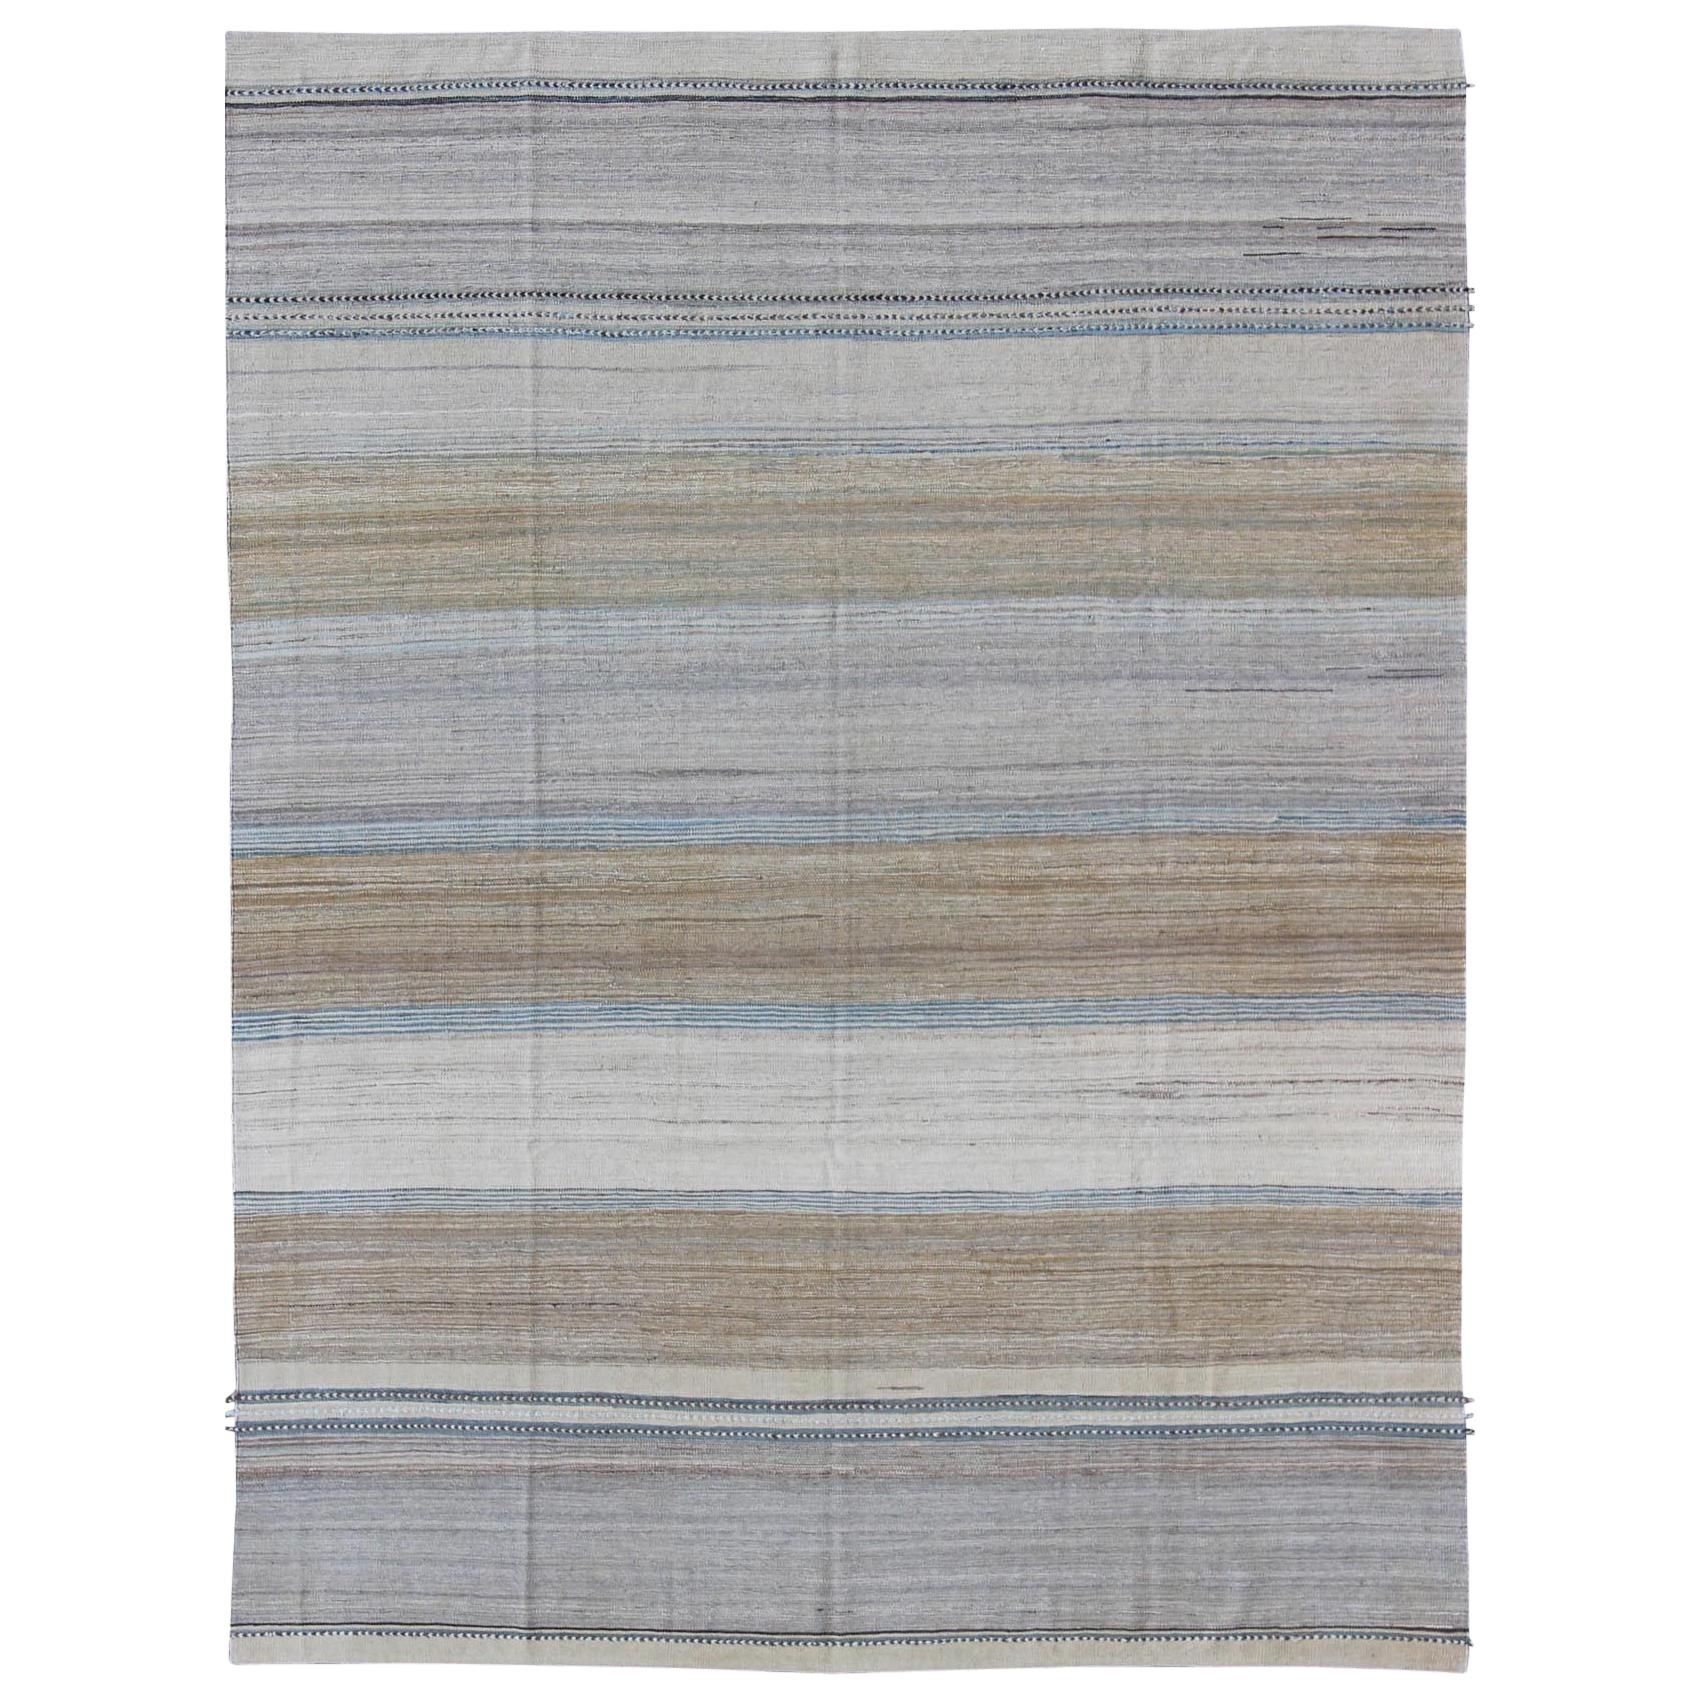 Modern Kilim Rug With Large Stripes in Shades of Blue, Taupe, Light Brown, Gray  For Sale